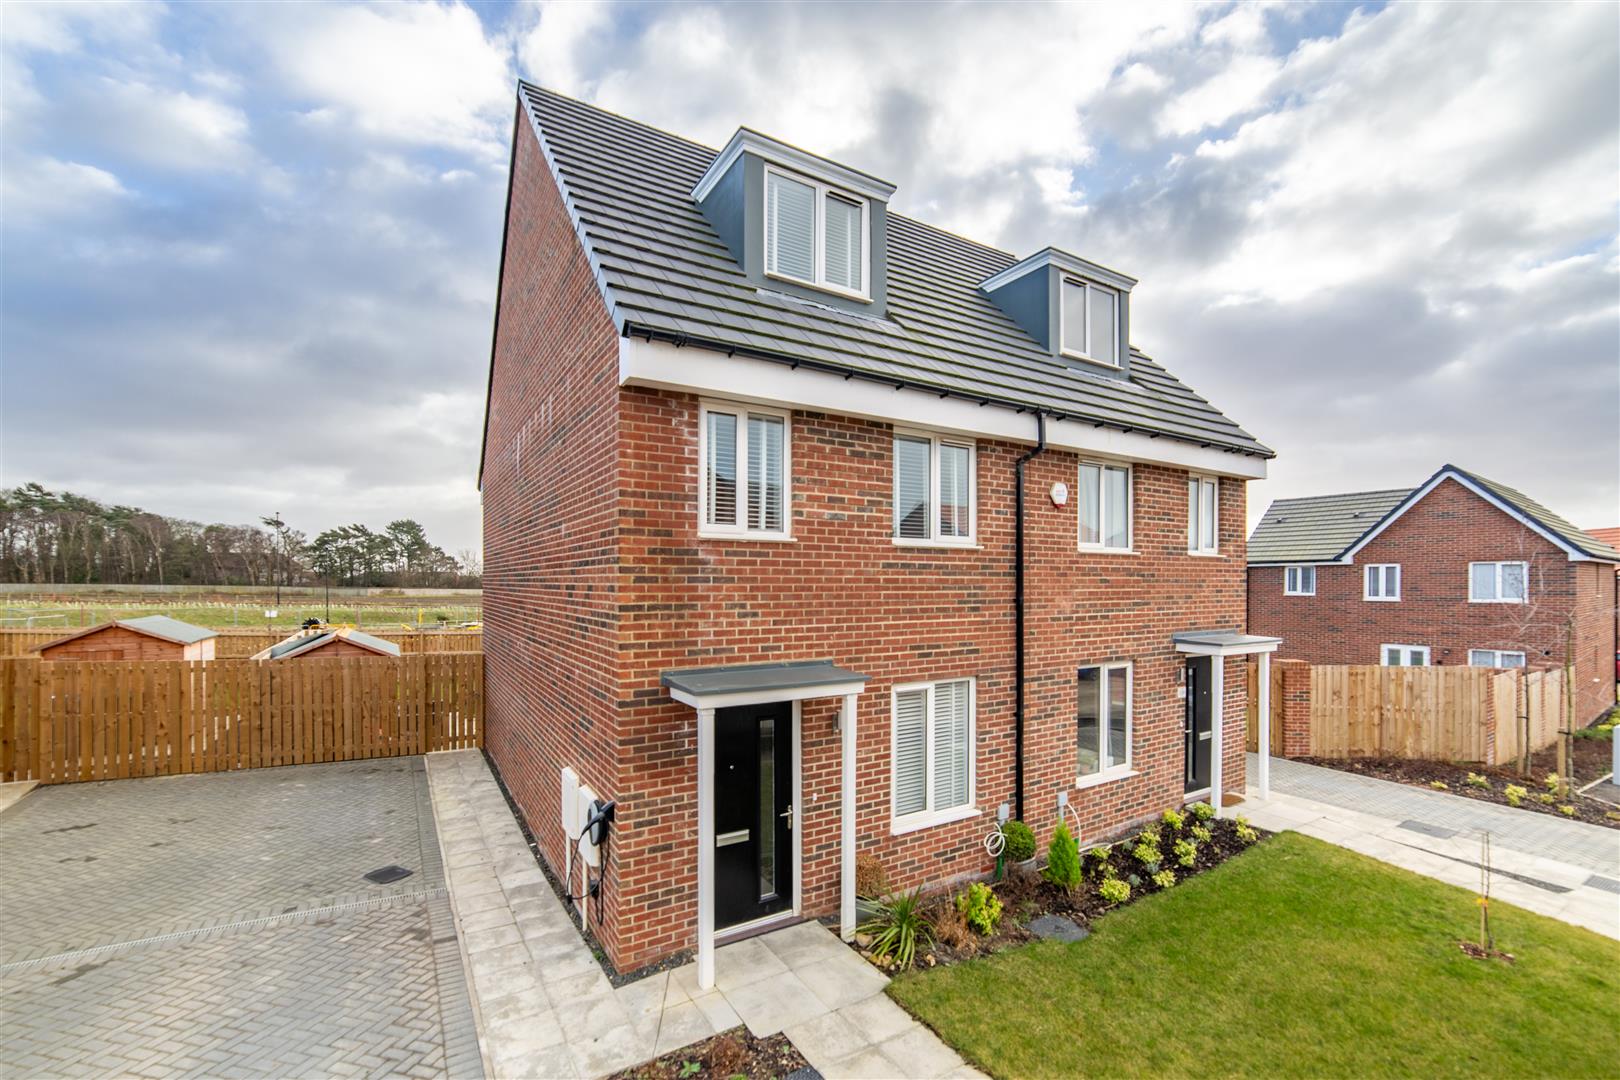 3 bed town house for sale in Poppy Place, Great Park, NE13